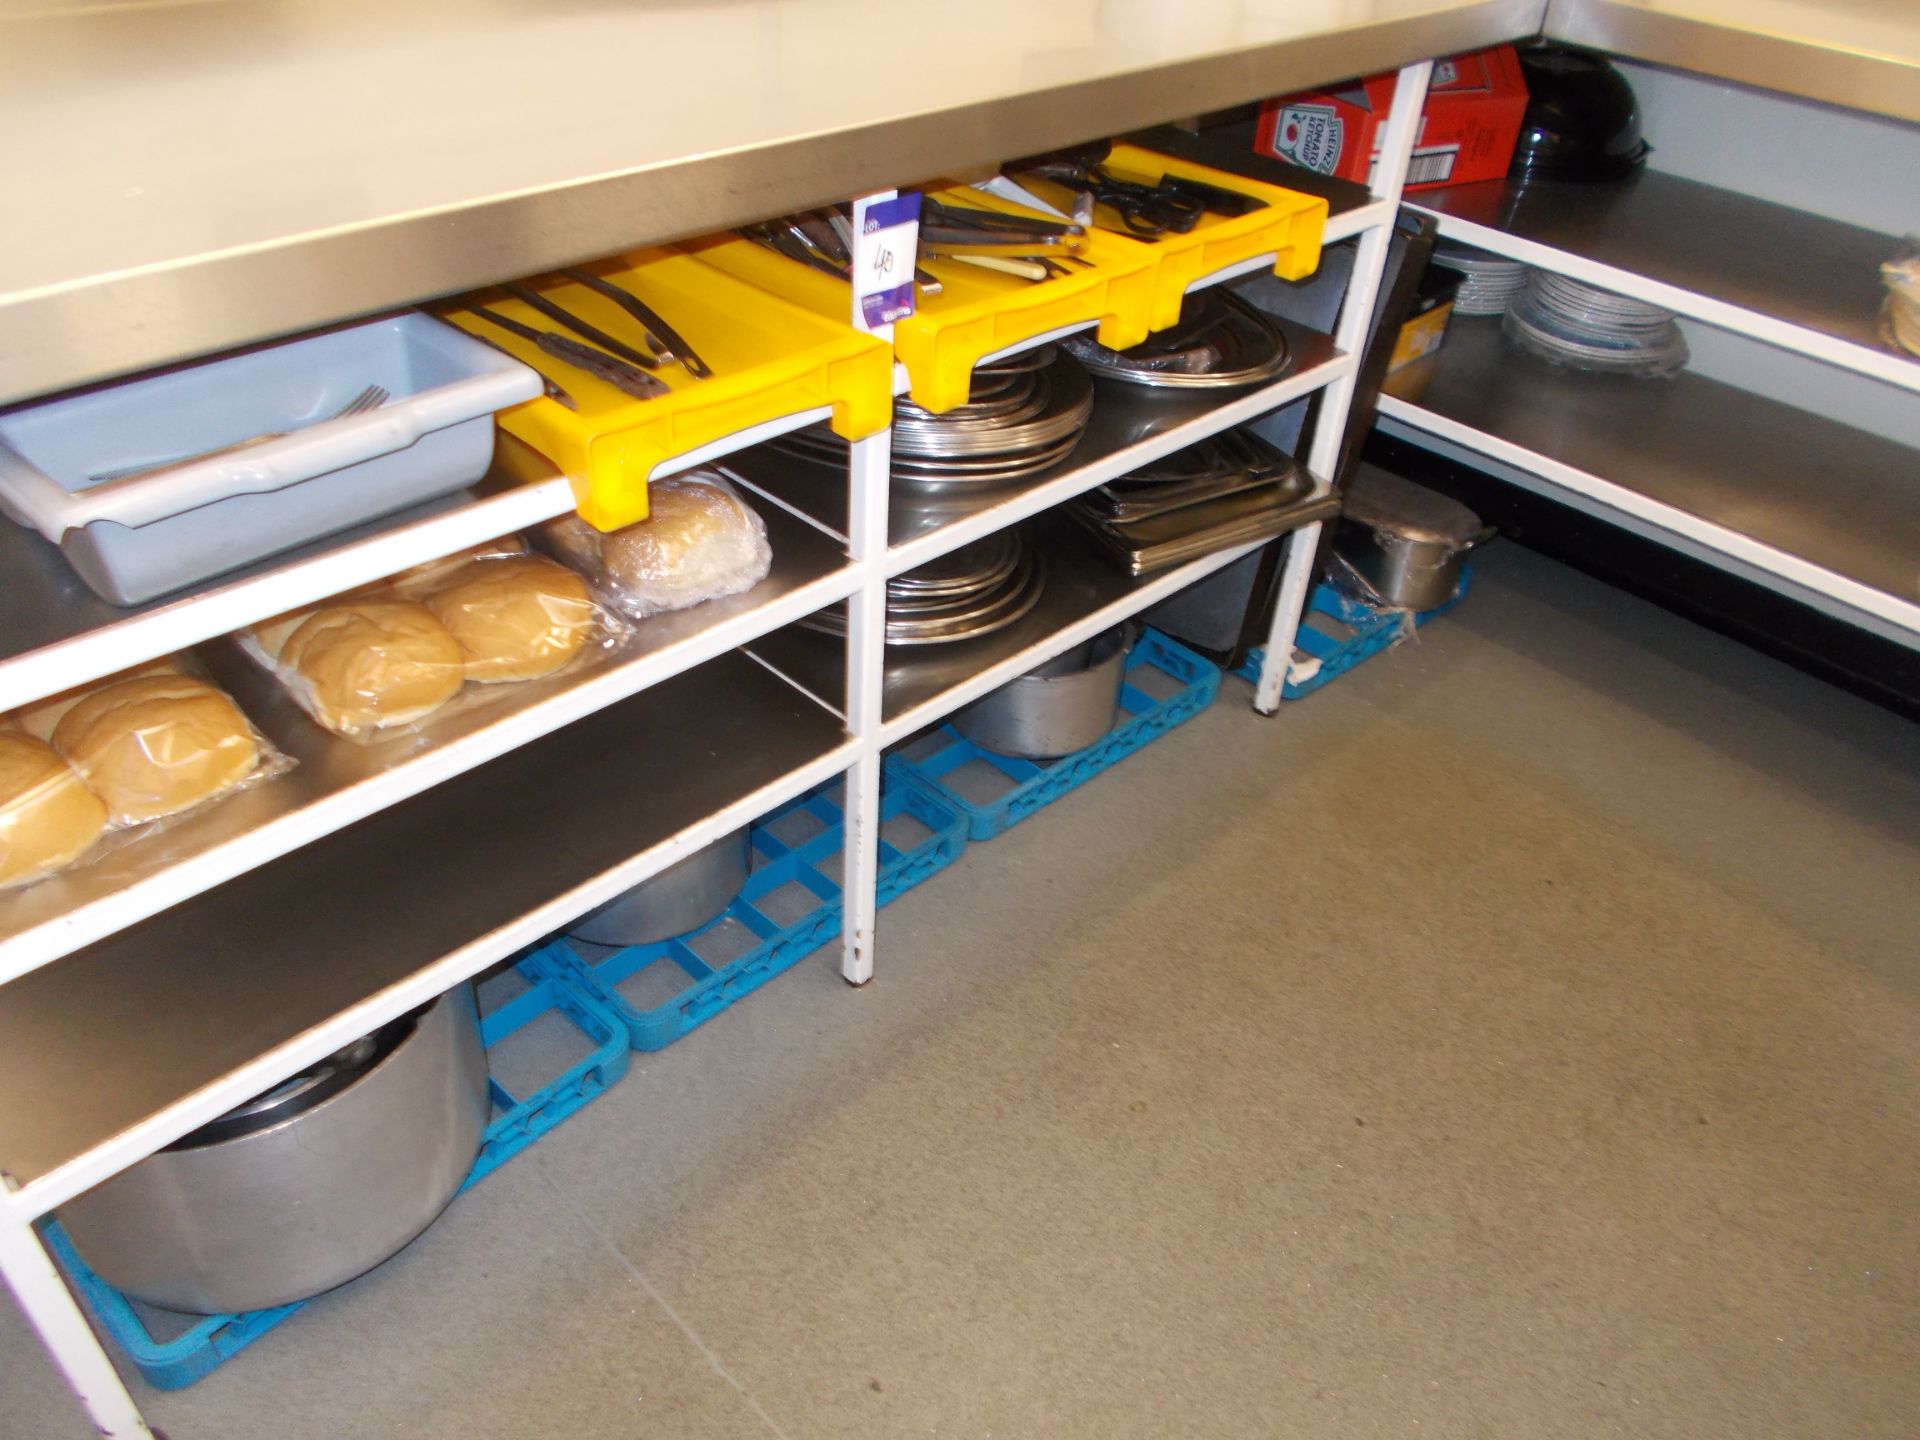 Large quantity of cutlery, trays etc to kitchen area (Shelving not included) - Image 2 of 3